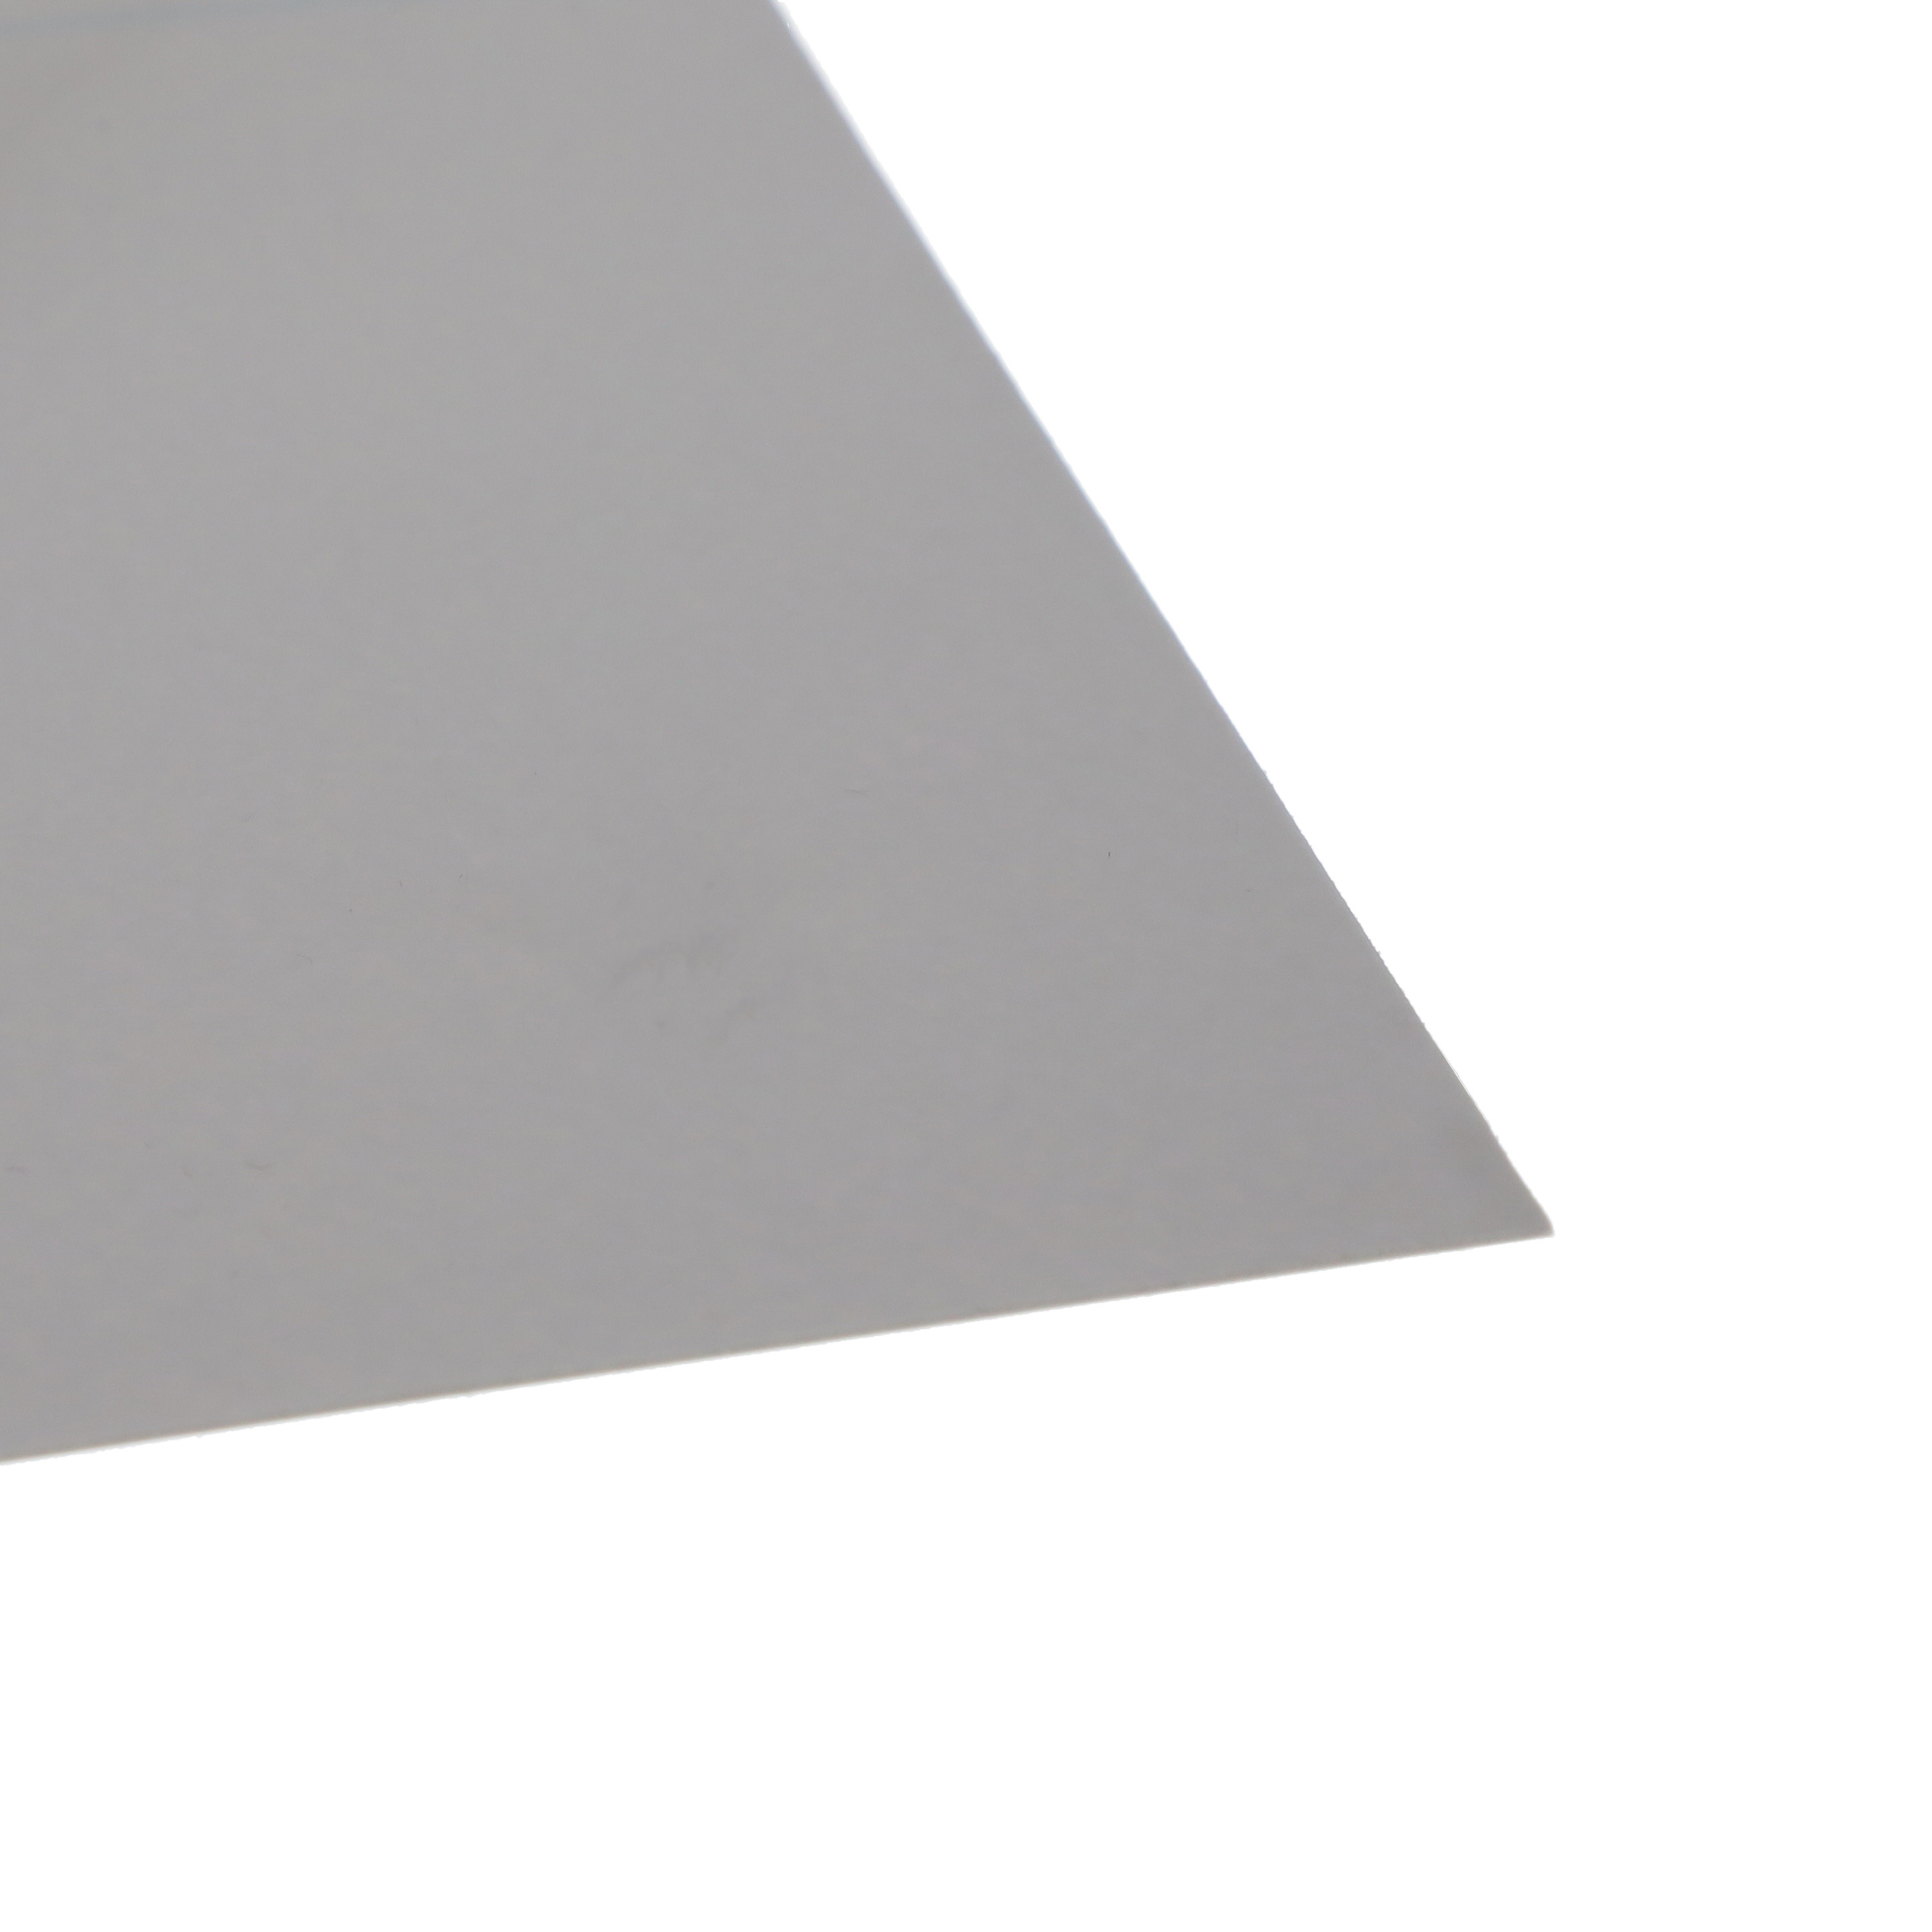 【COH-1706-410-05-1NT】THERM PAD 410X410MM GRAY